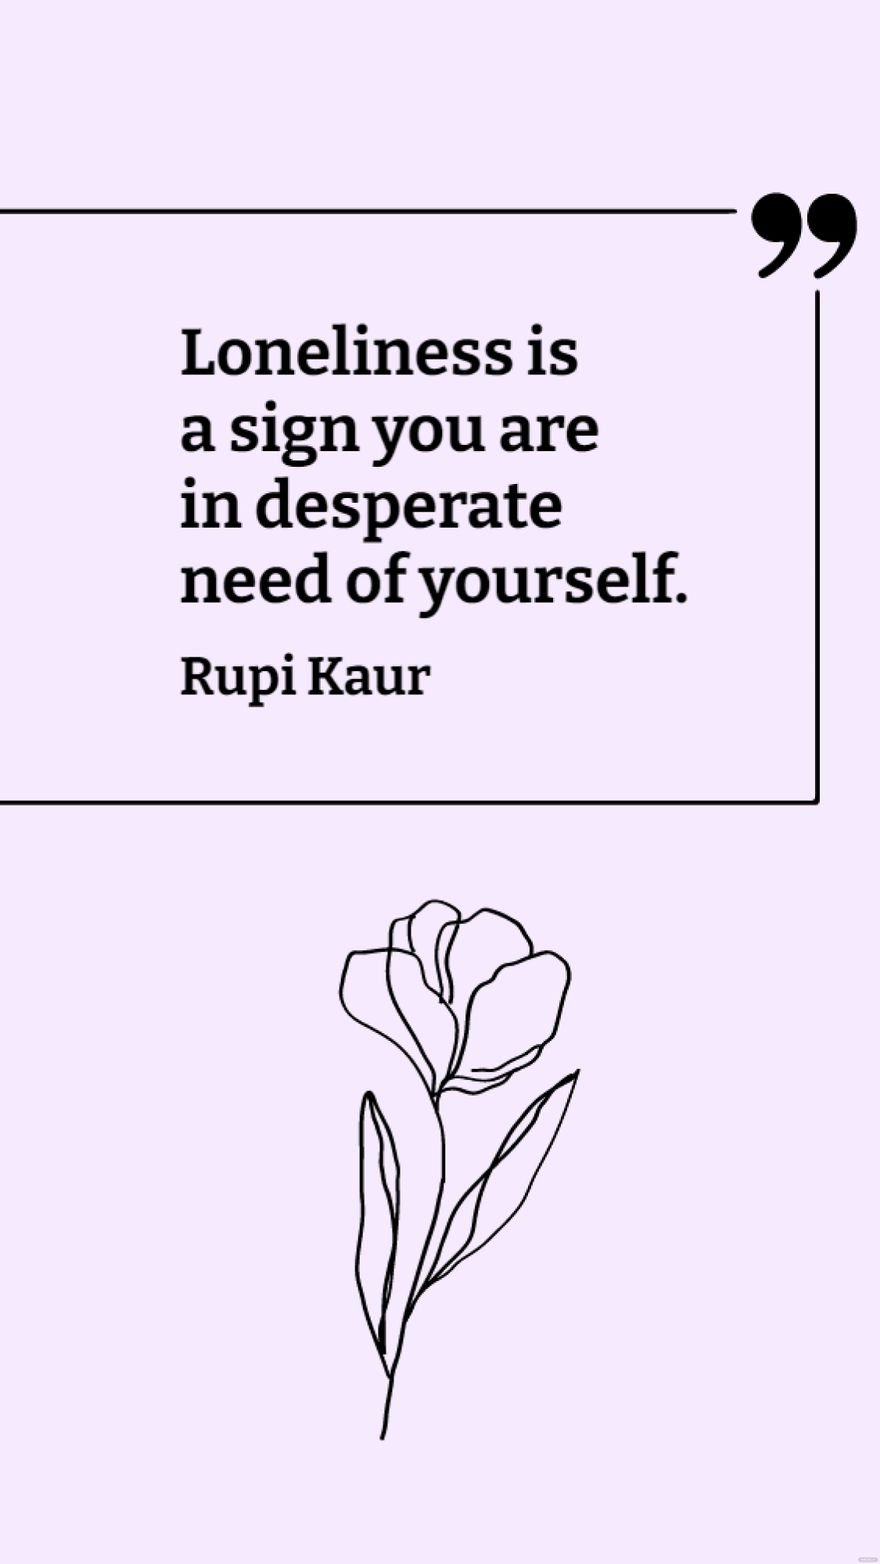 Free Rupi Kaur - Loneliness is a sign you are in desperate need of yourself. in JPG